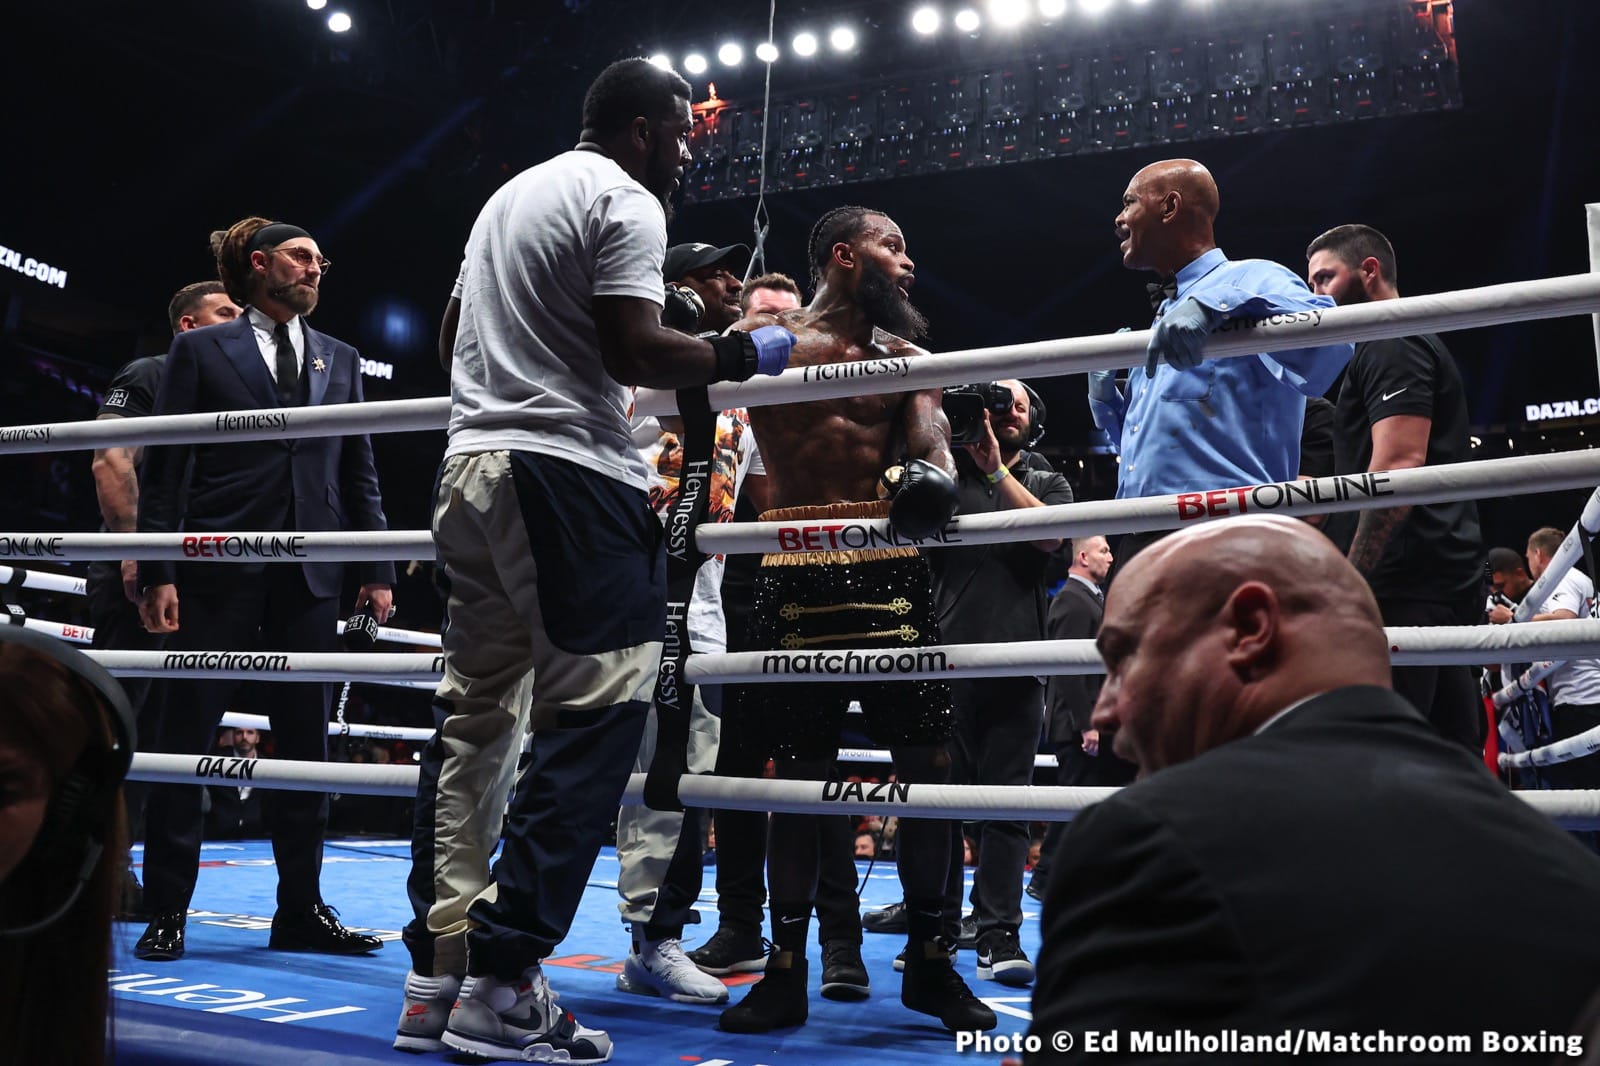 Image: Eddie Hearn denies Montana Love intentionally threw Steve Spark out of ring